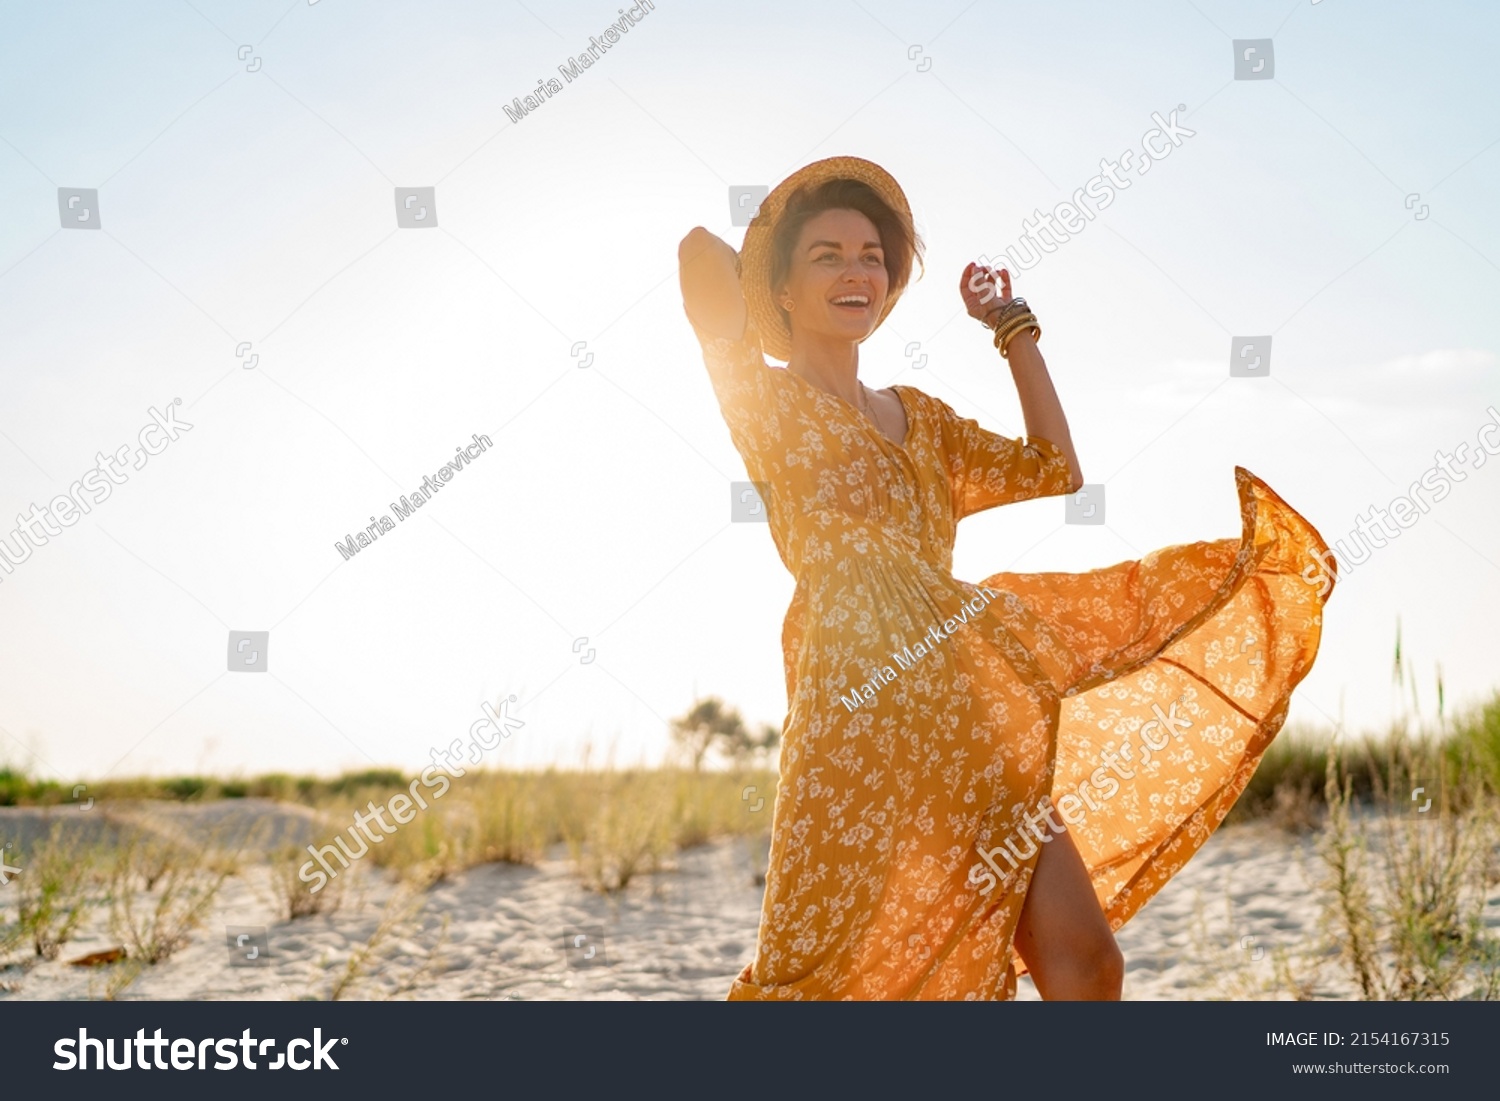 stylish attractive slim smiling woman on beach in summer style fashion trend outfit carefree and happy, feeling freedom, wearing yellow printed dress boho style chic and straw hat #2154167315